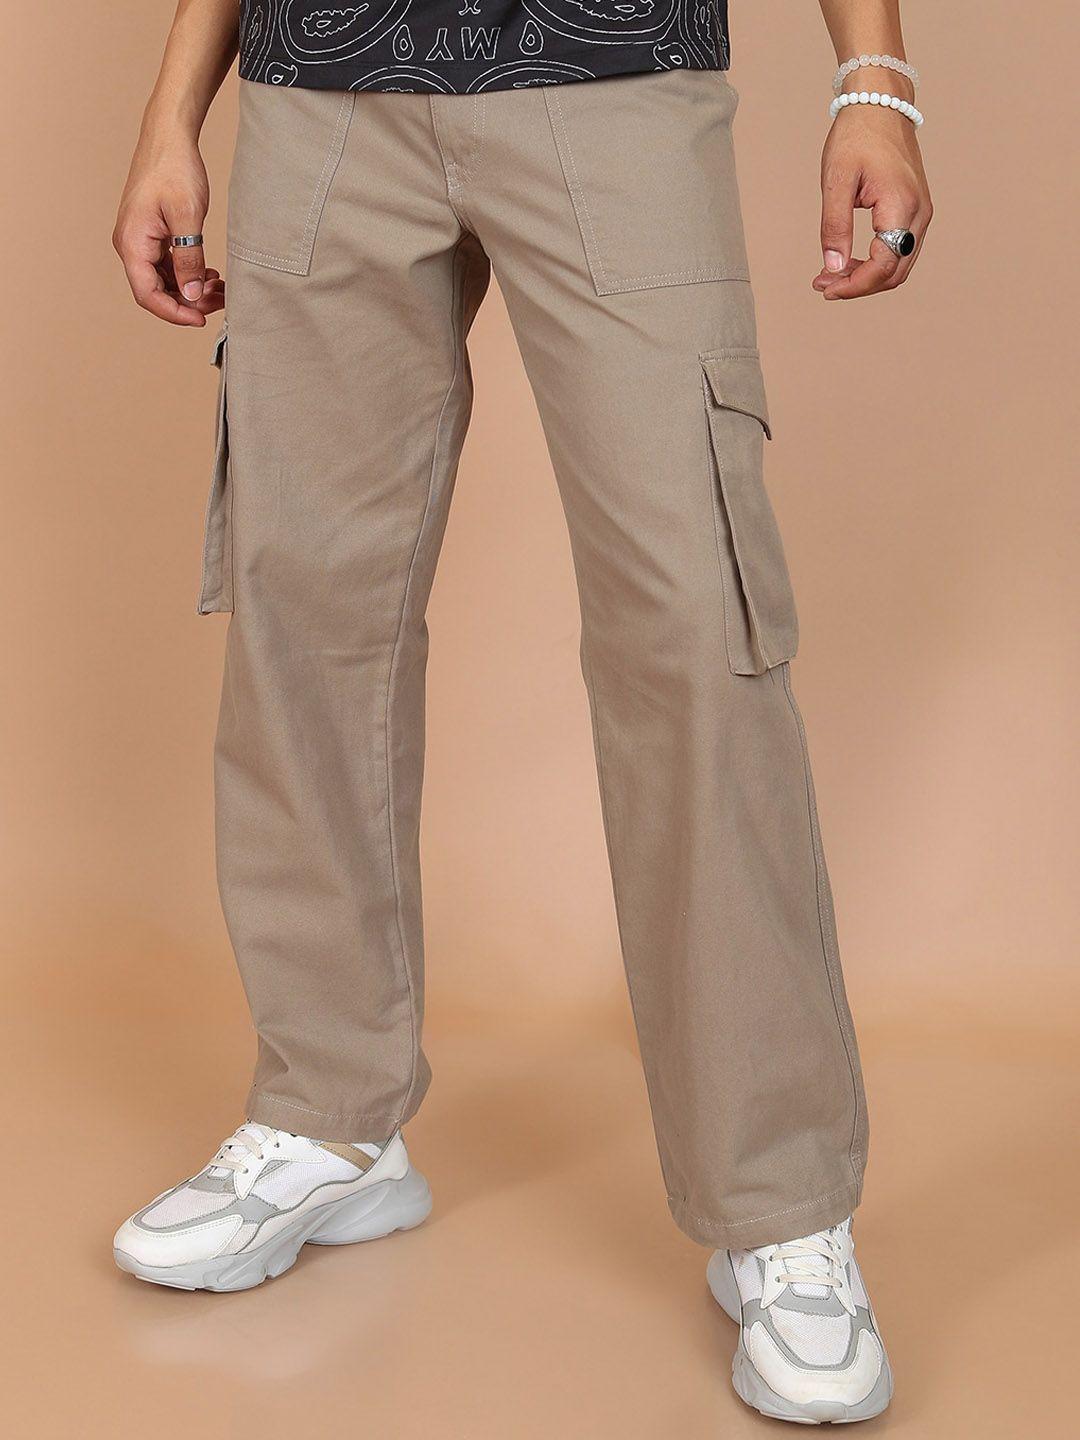 highlander men taupe mid-rise cotton cargos trousers